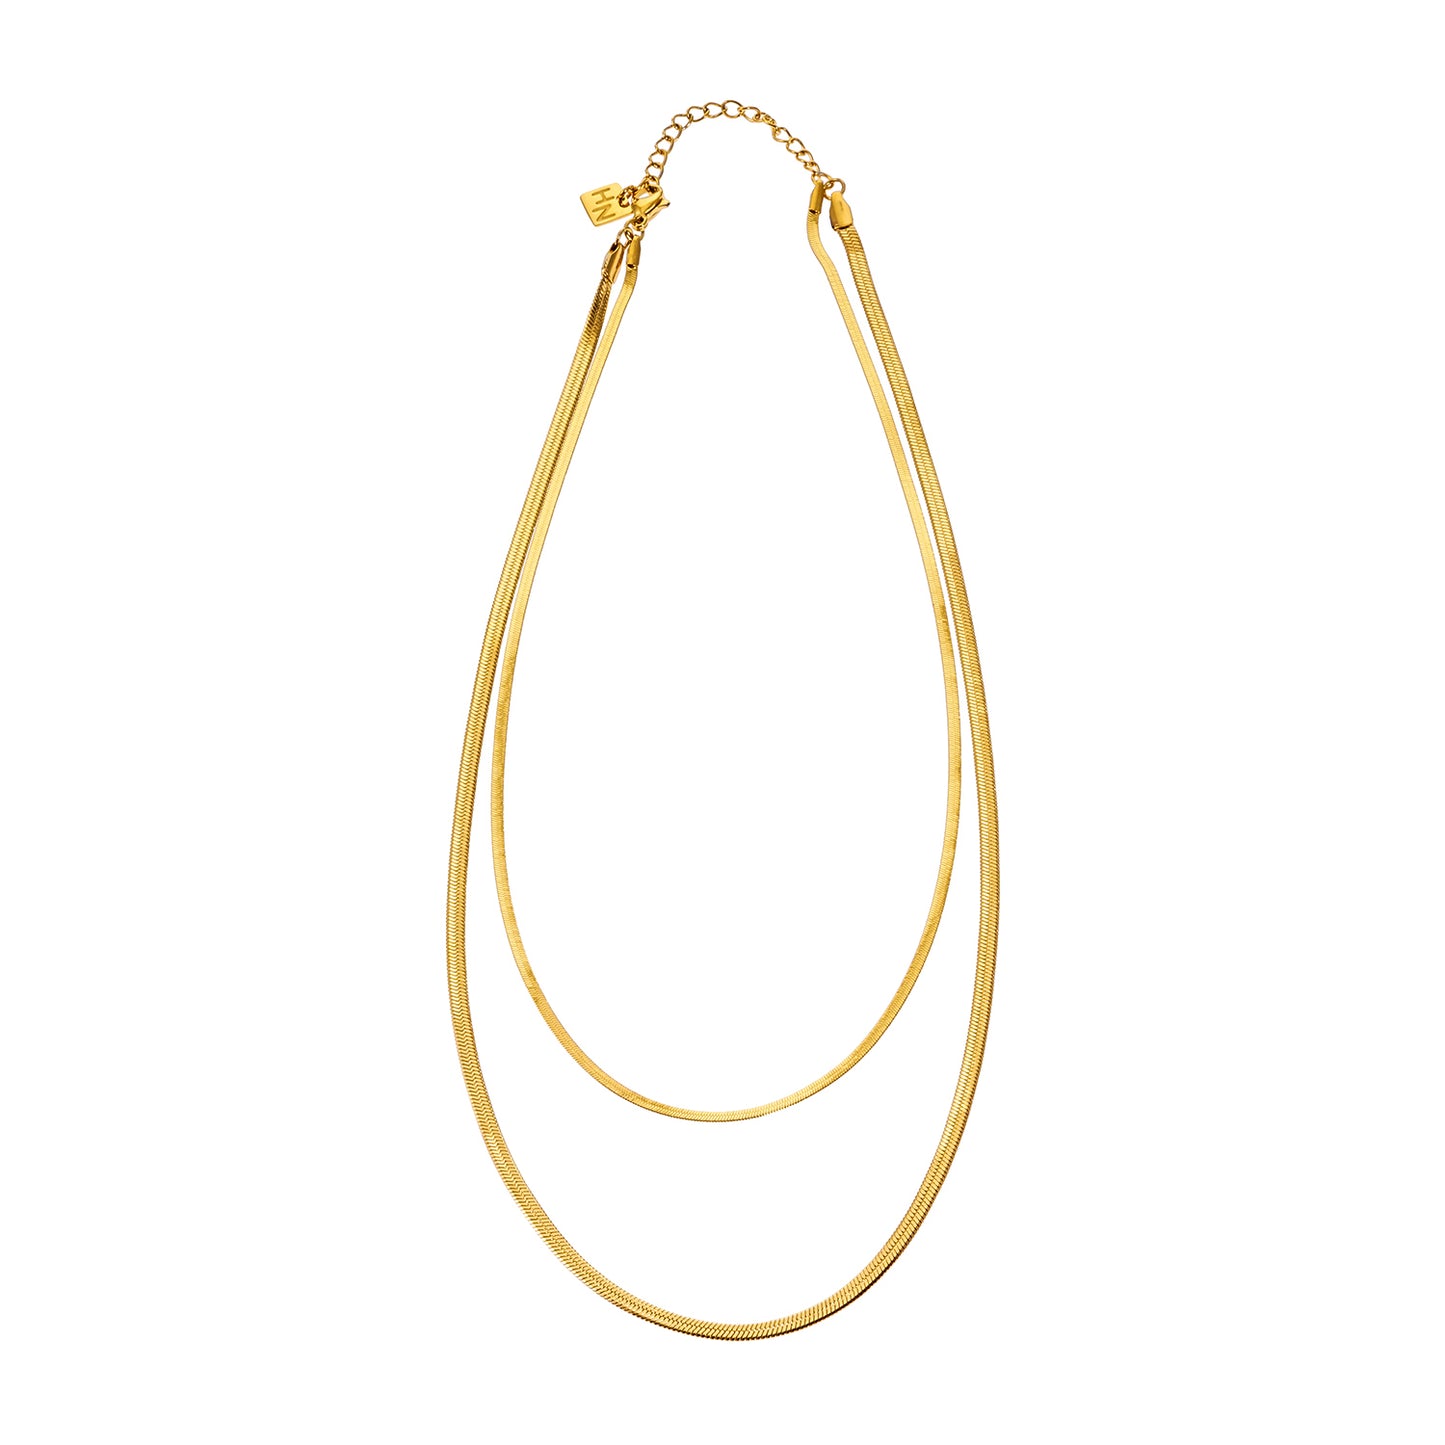 Style GINTA 7312: Snake-Skin Textured 2-Layer Gold Necklace.